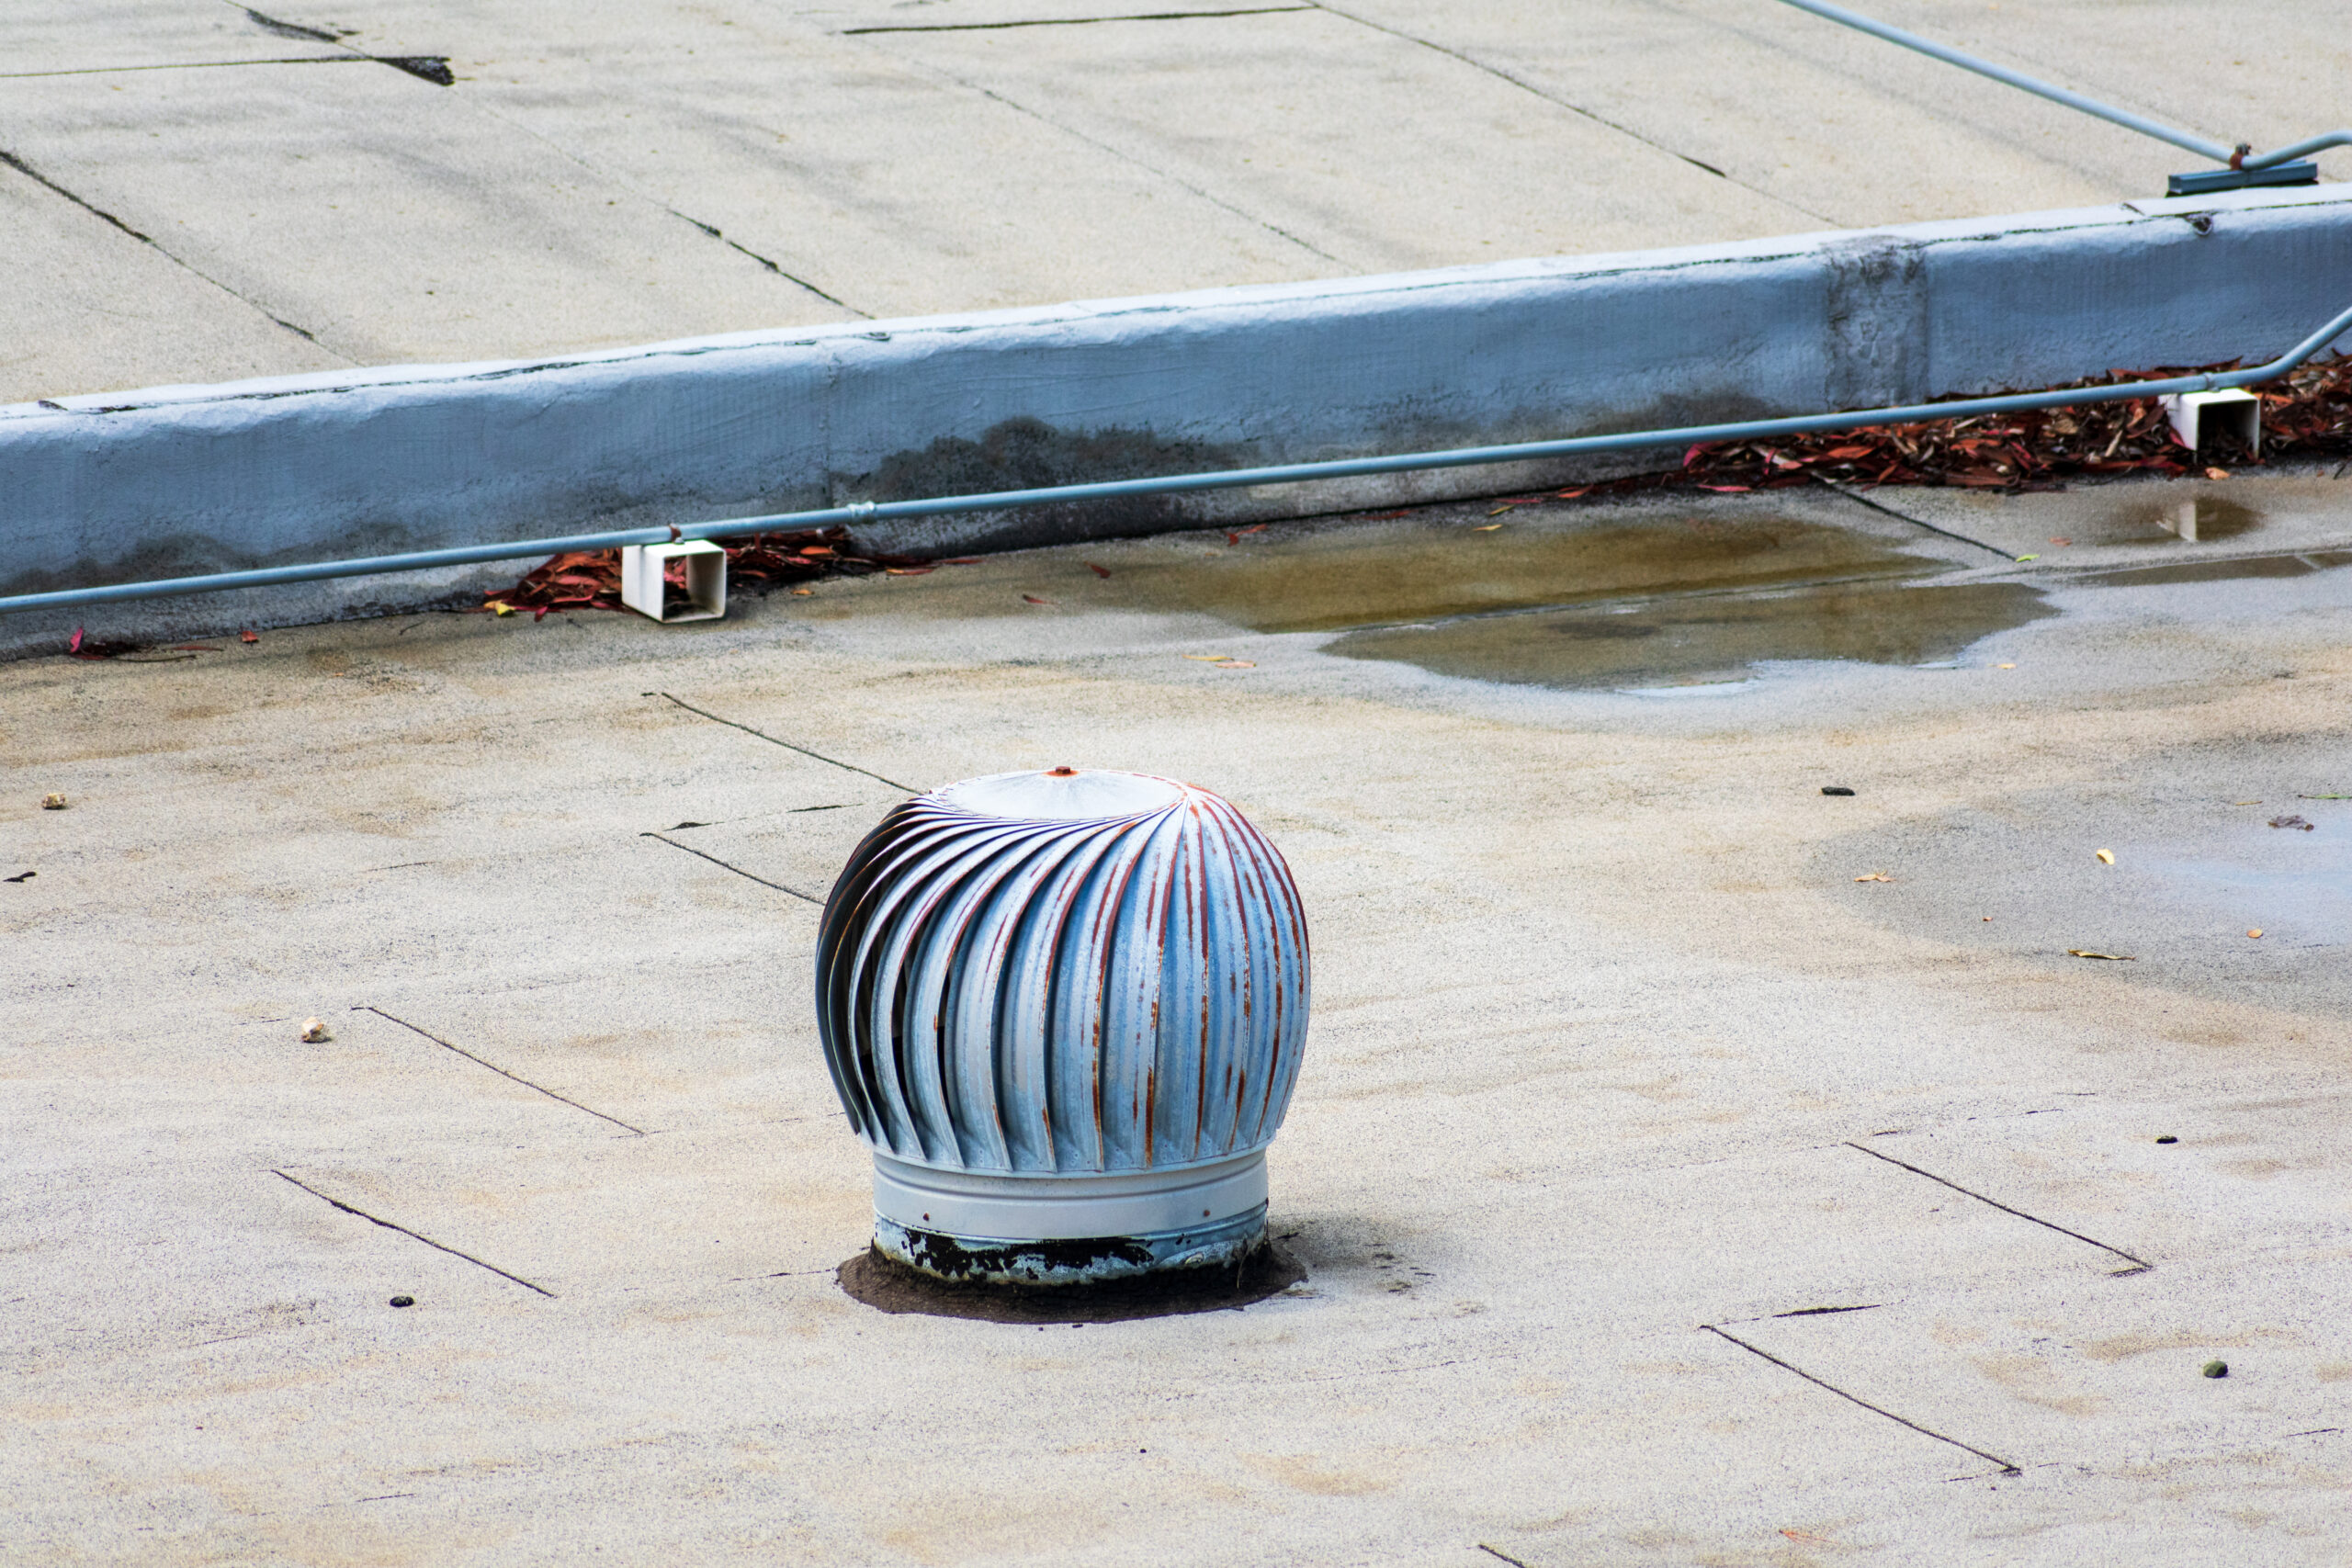 Pooling water and debris on a flat roof behind a turbine vent